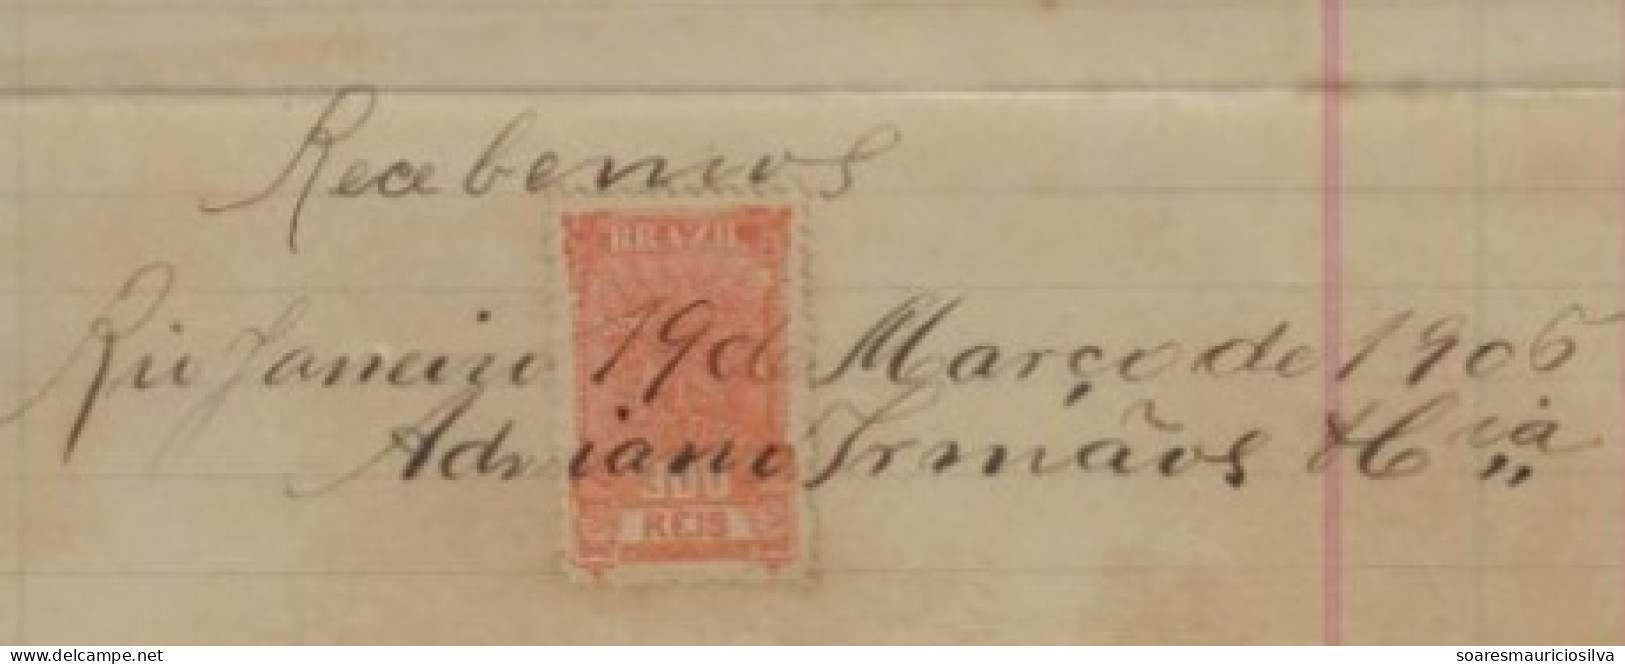 Brazil 1906 Invoice Factory Brushes Dustpans Broomsby Adriano Brothers &Co Rio De Janeiro Federal Treasury Tax Stamp 300 - Briefe U. Dokumente